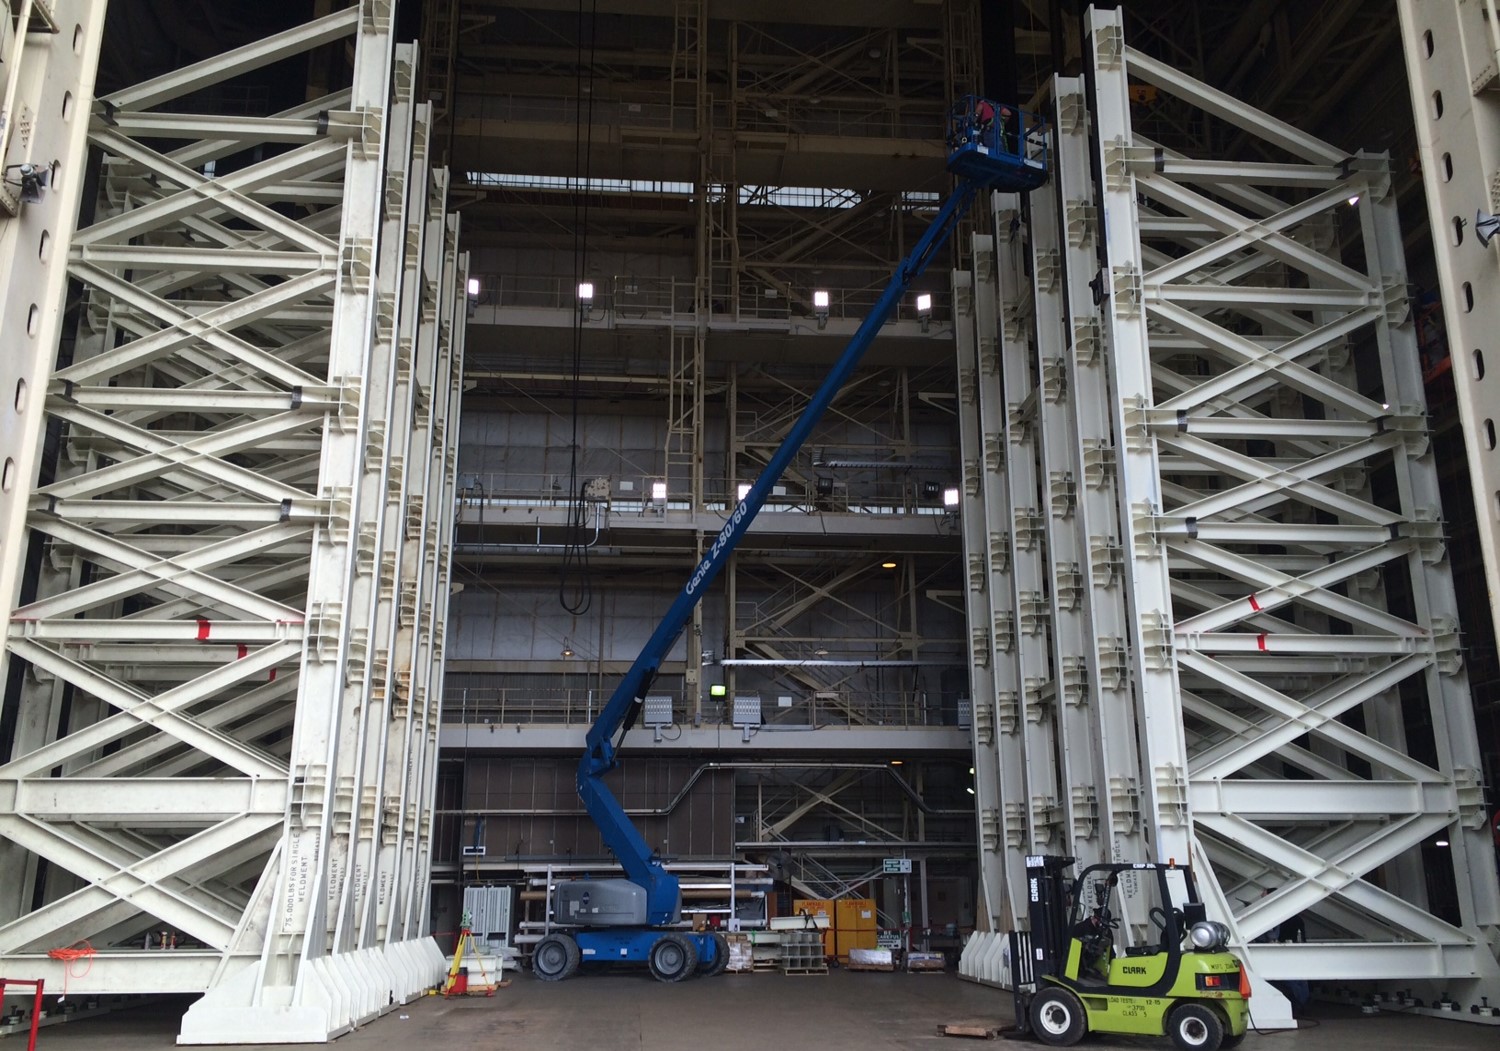 Twelve main tower panels for the intertank test structure have been installed at the Building 4619 load test annex.